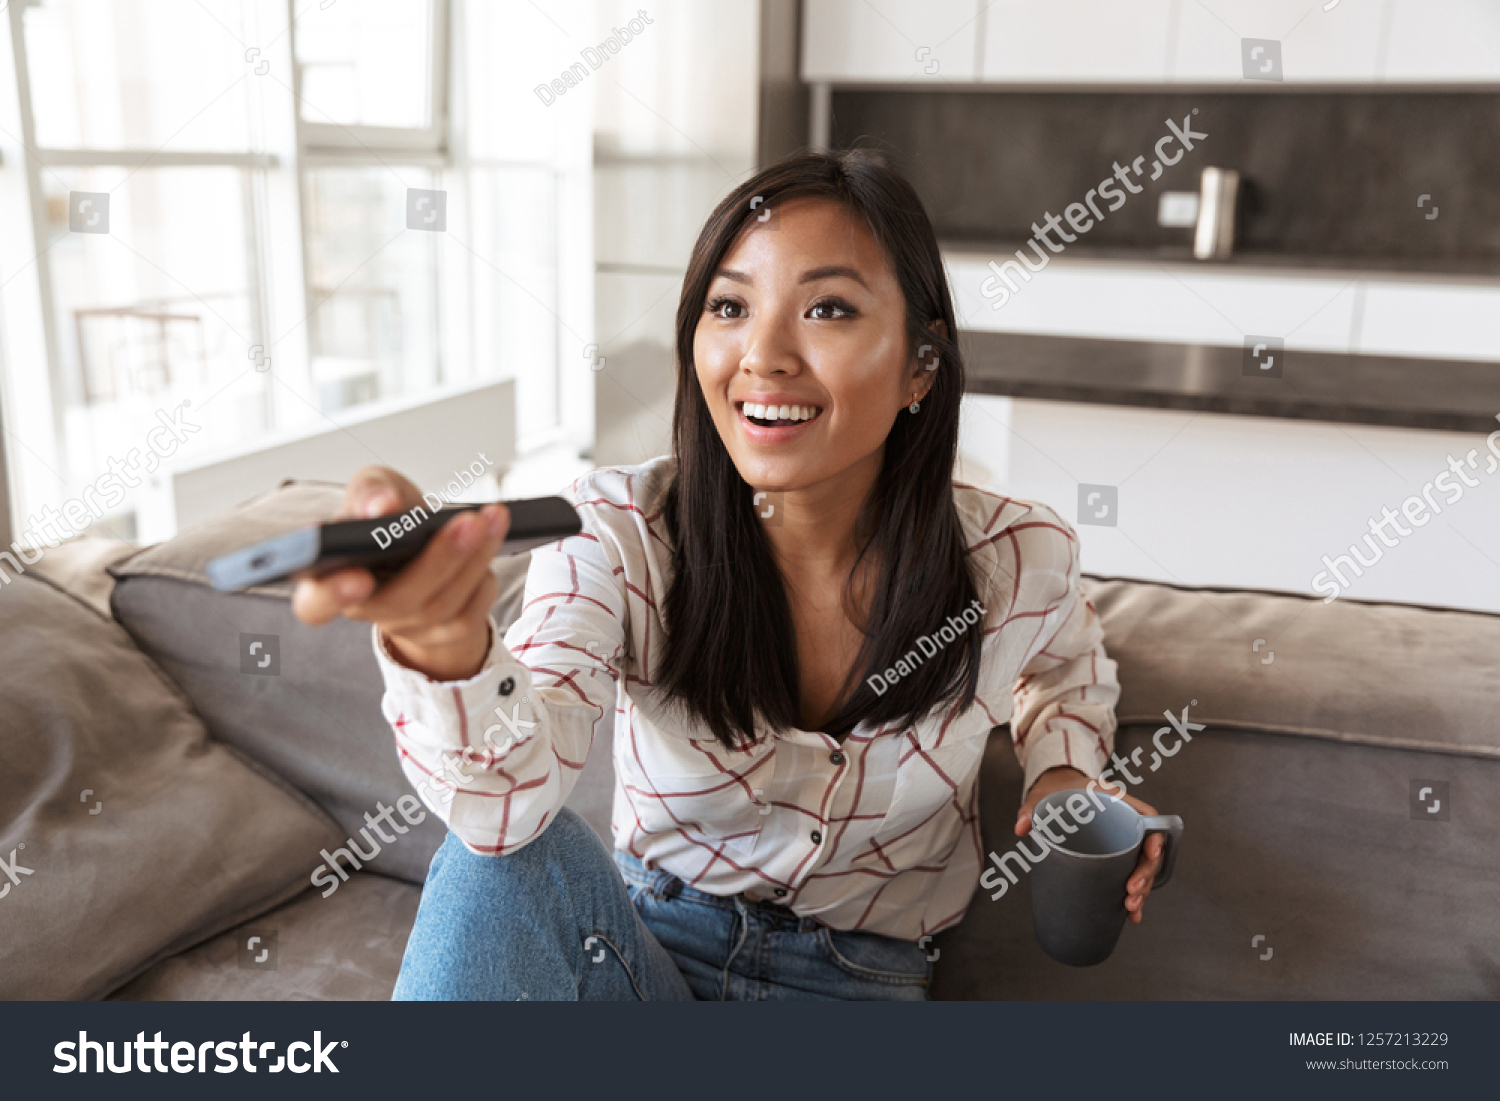 Photo of positive asian woman 20s holding remote control and watching TV while sitting at sofa in cozy apartment #1257213229